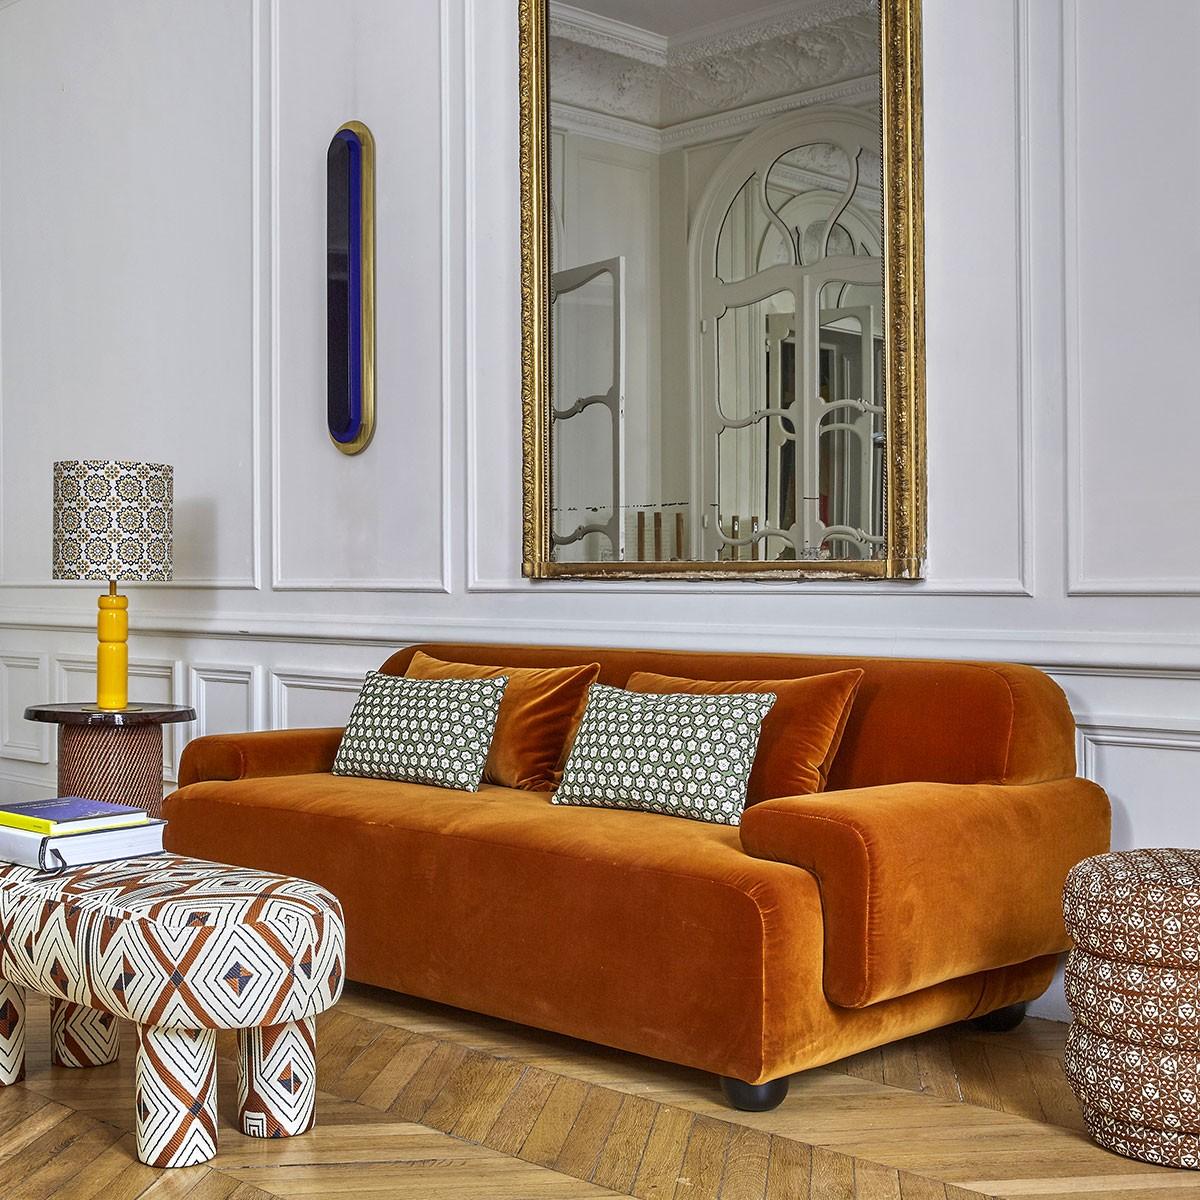 Popus Editions Lena 4-seater sofa in yellow Verone velvet upholstery

It looks like it's straight out of a movie, with its generous curves and wide armrests. It is a real invitation to spend long Sundays with the family, comfortably seated in